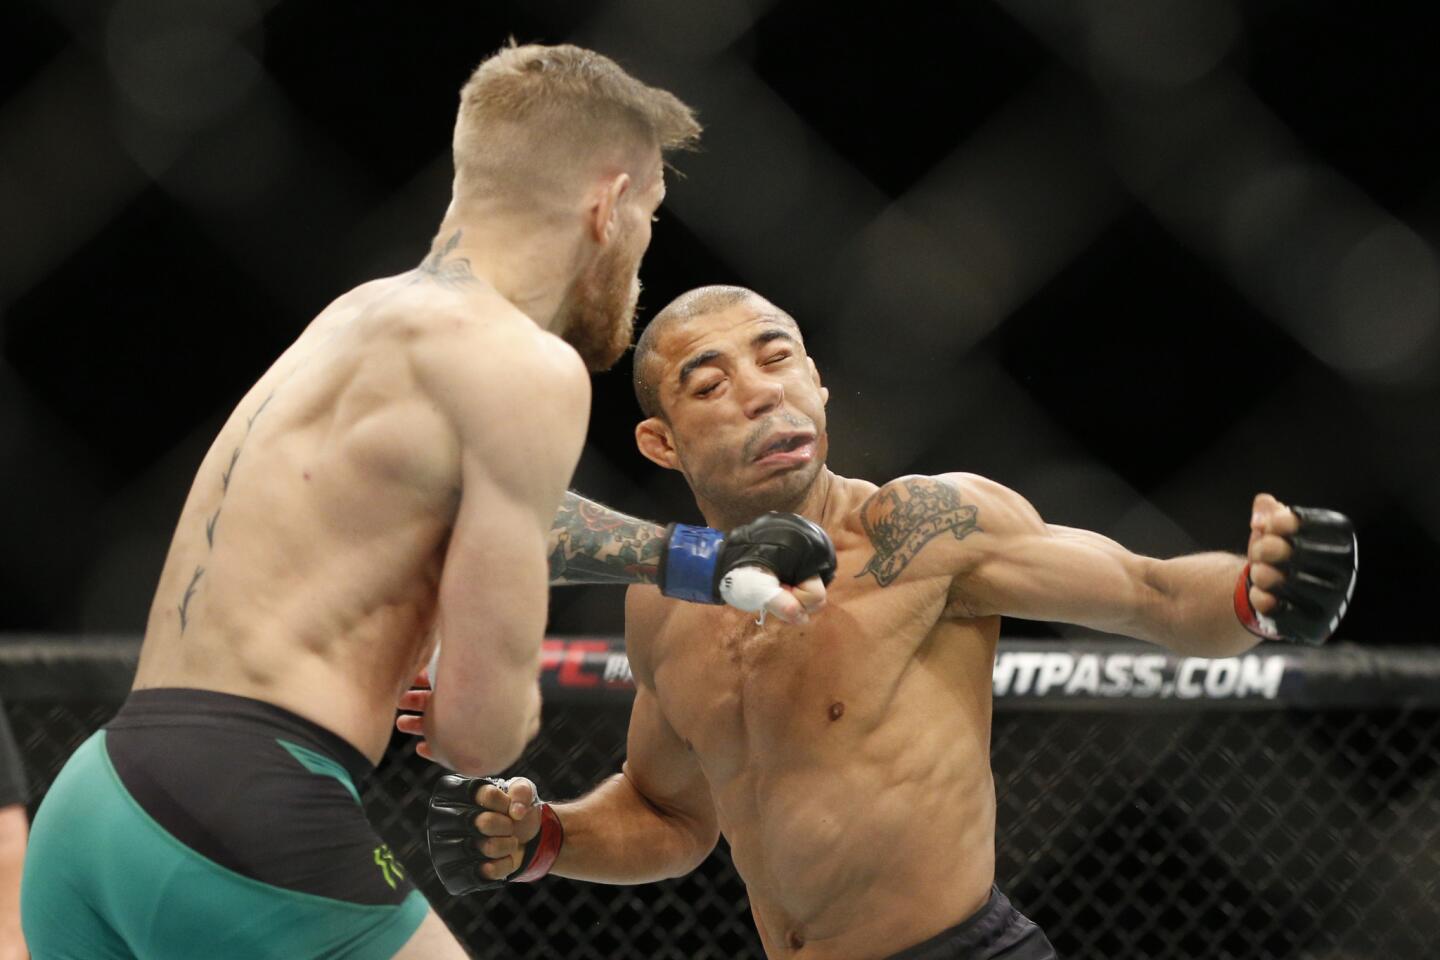 Conor McGregor, left, knocked out Jose Aldo with his first punch at UFC 194 in Las Vegas to claim the featherweight title on Dec. 12.